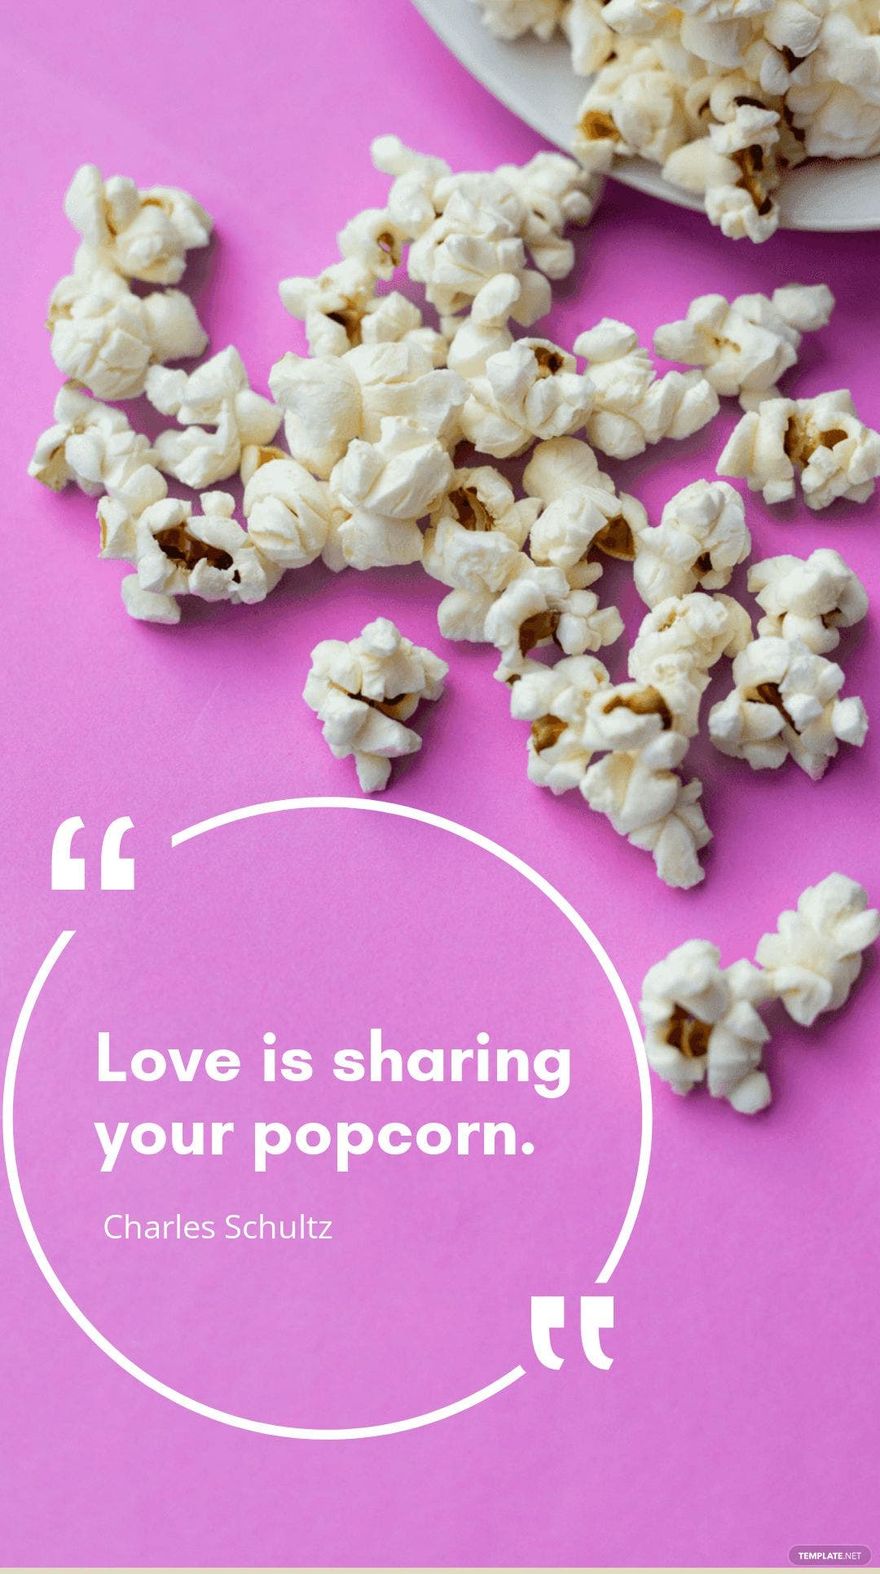 Charles Schultz - “Love is sharing your popcorn.”